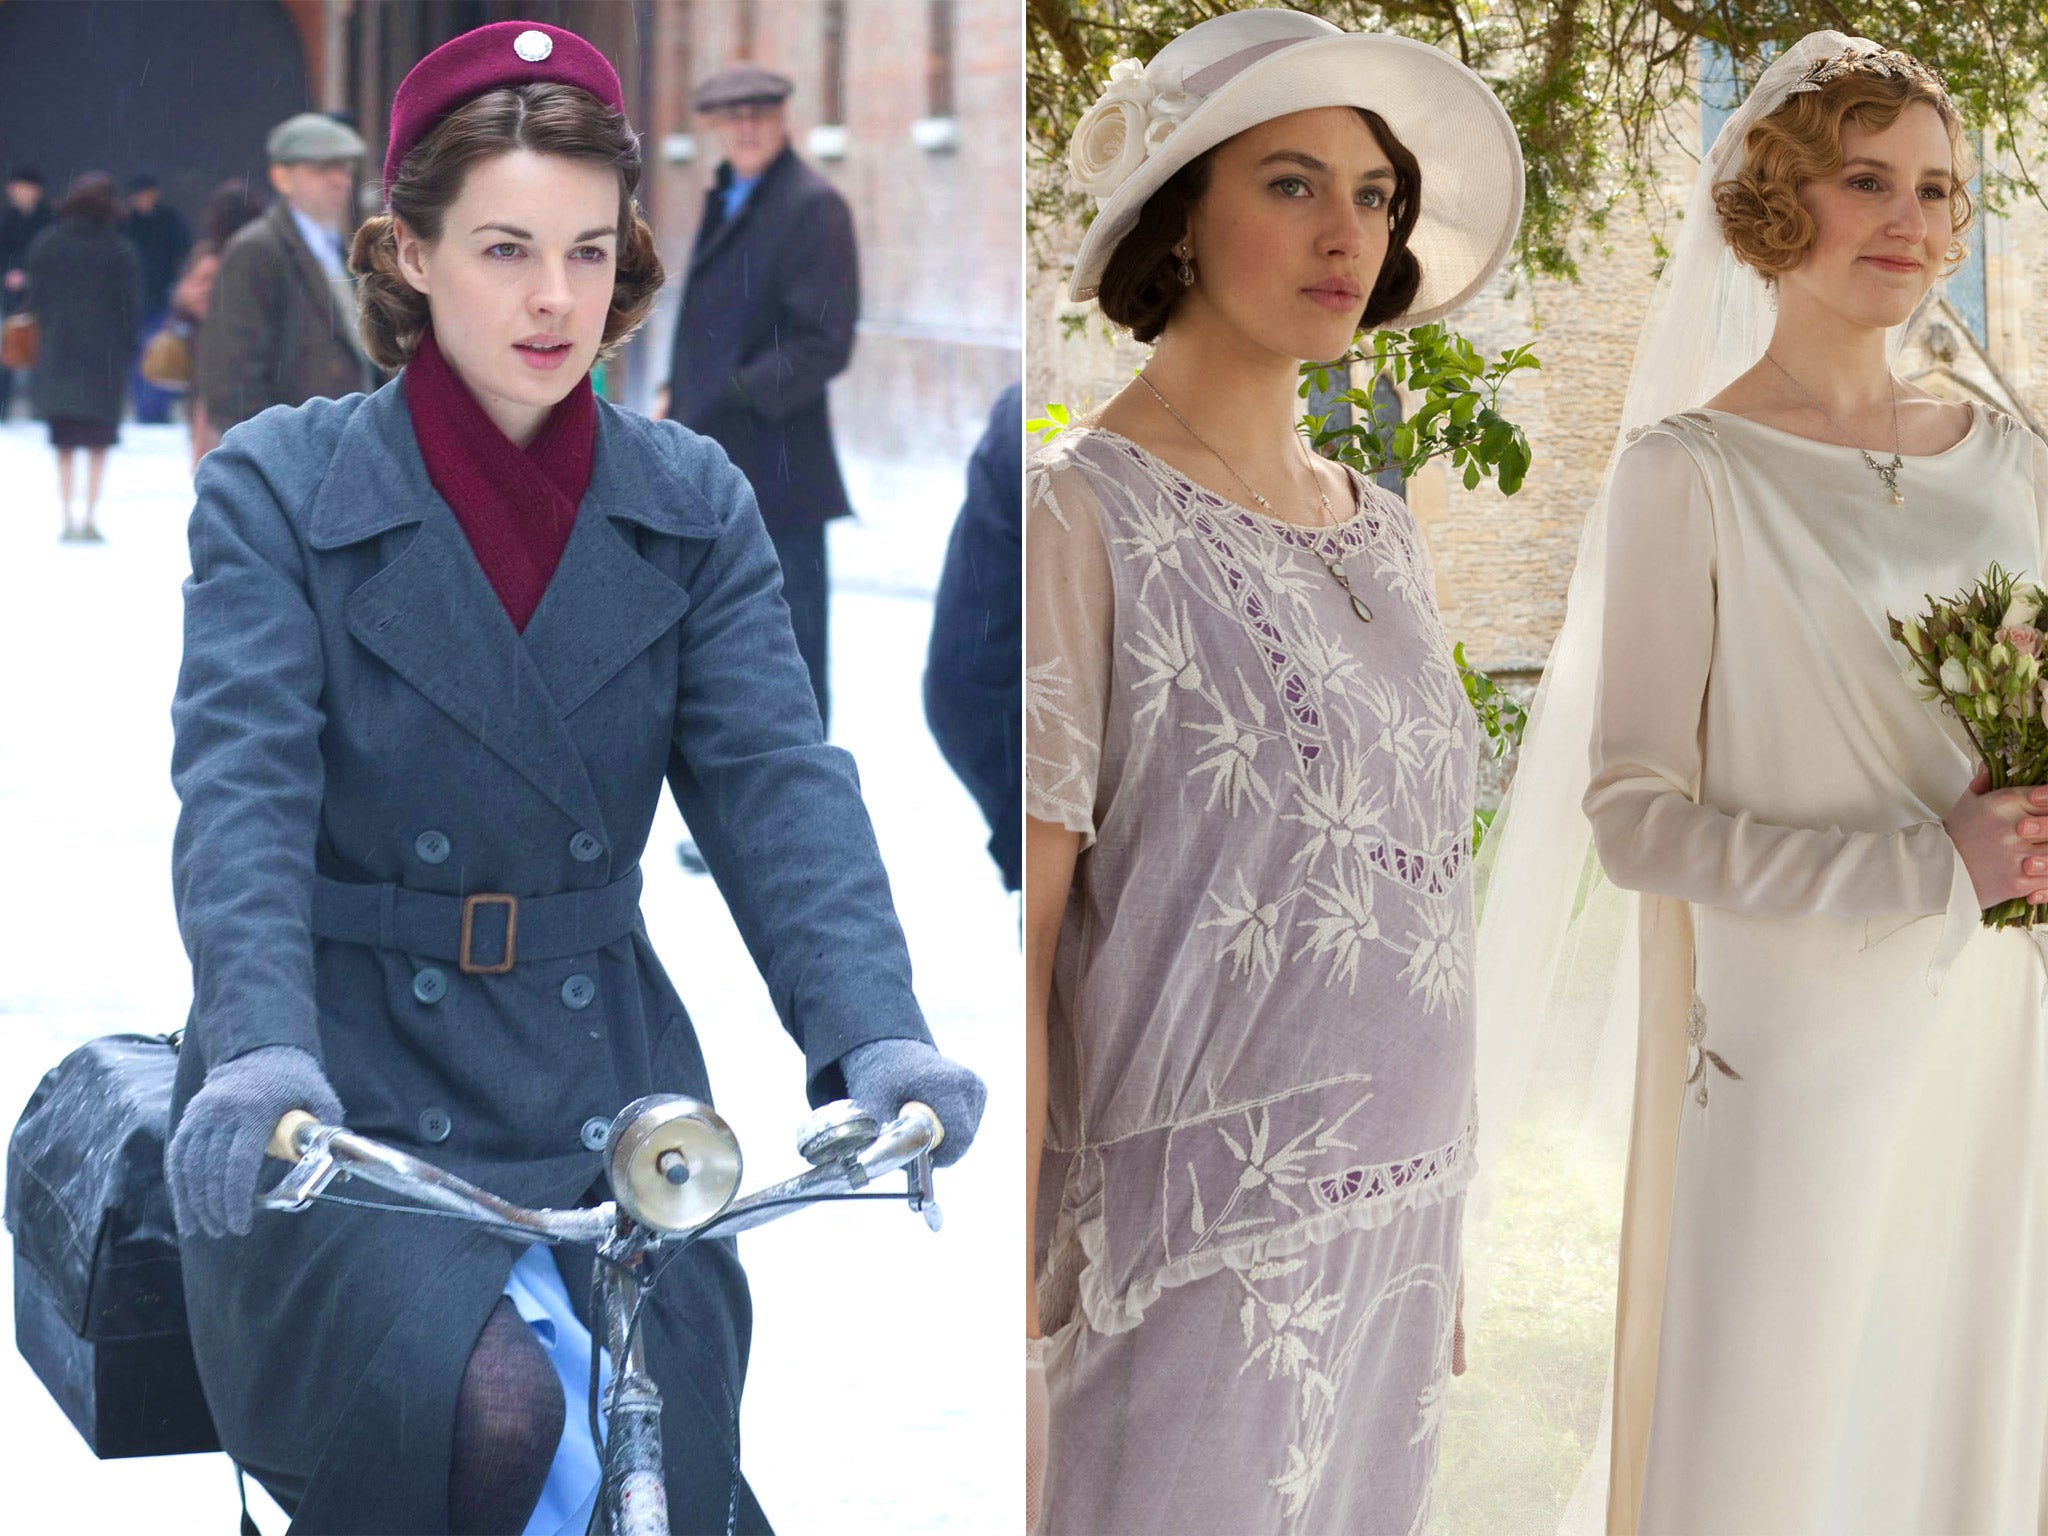 'Call The Midwife' and 'Downton Abbey' will not go head-to-head this Christmas